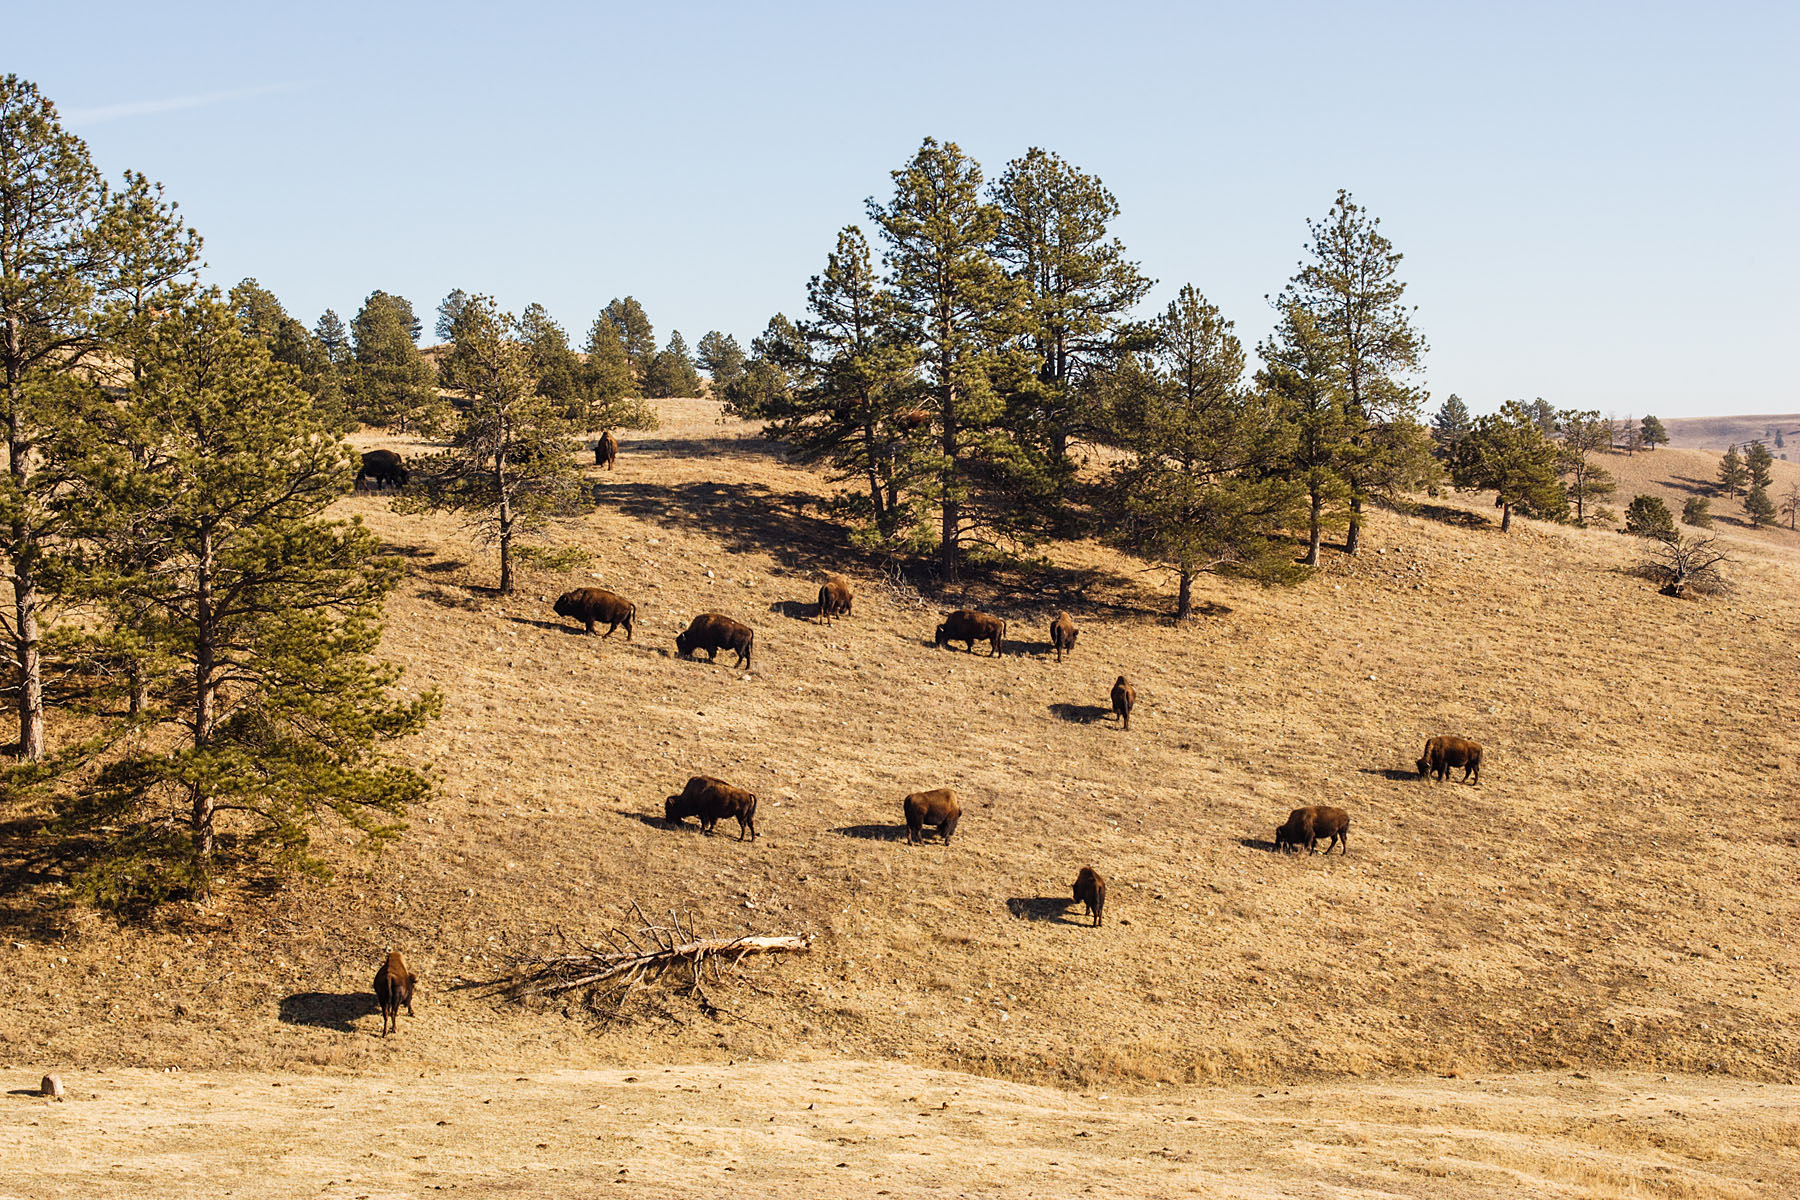 Bison, Custer State Park, South Dakota.  Click for next photo.